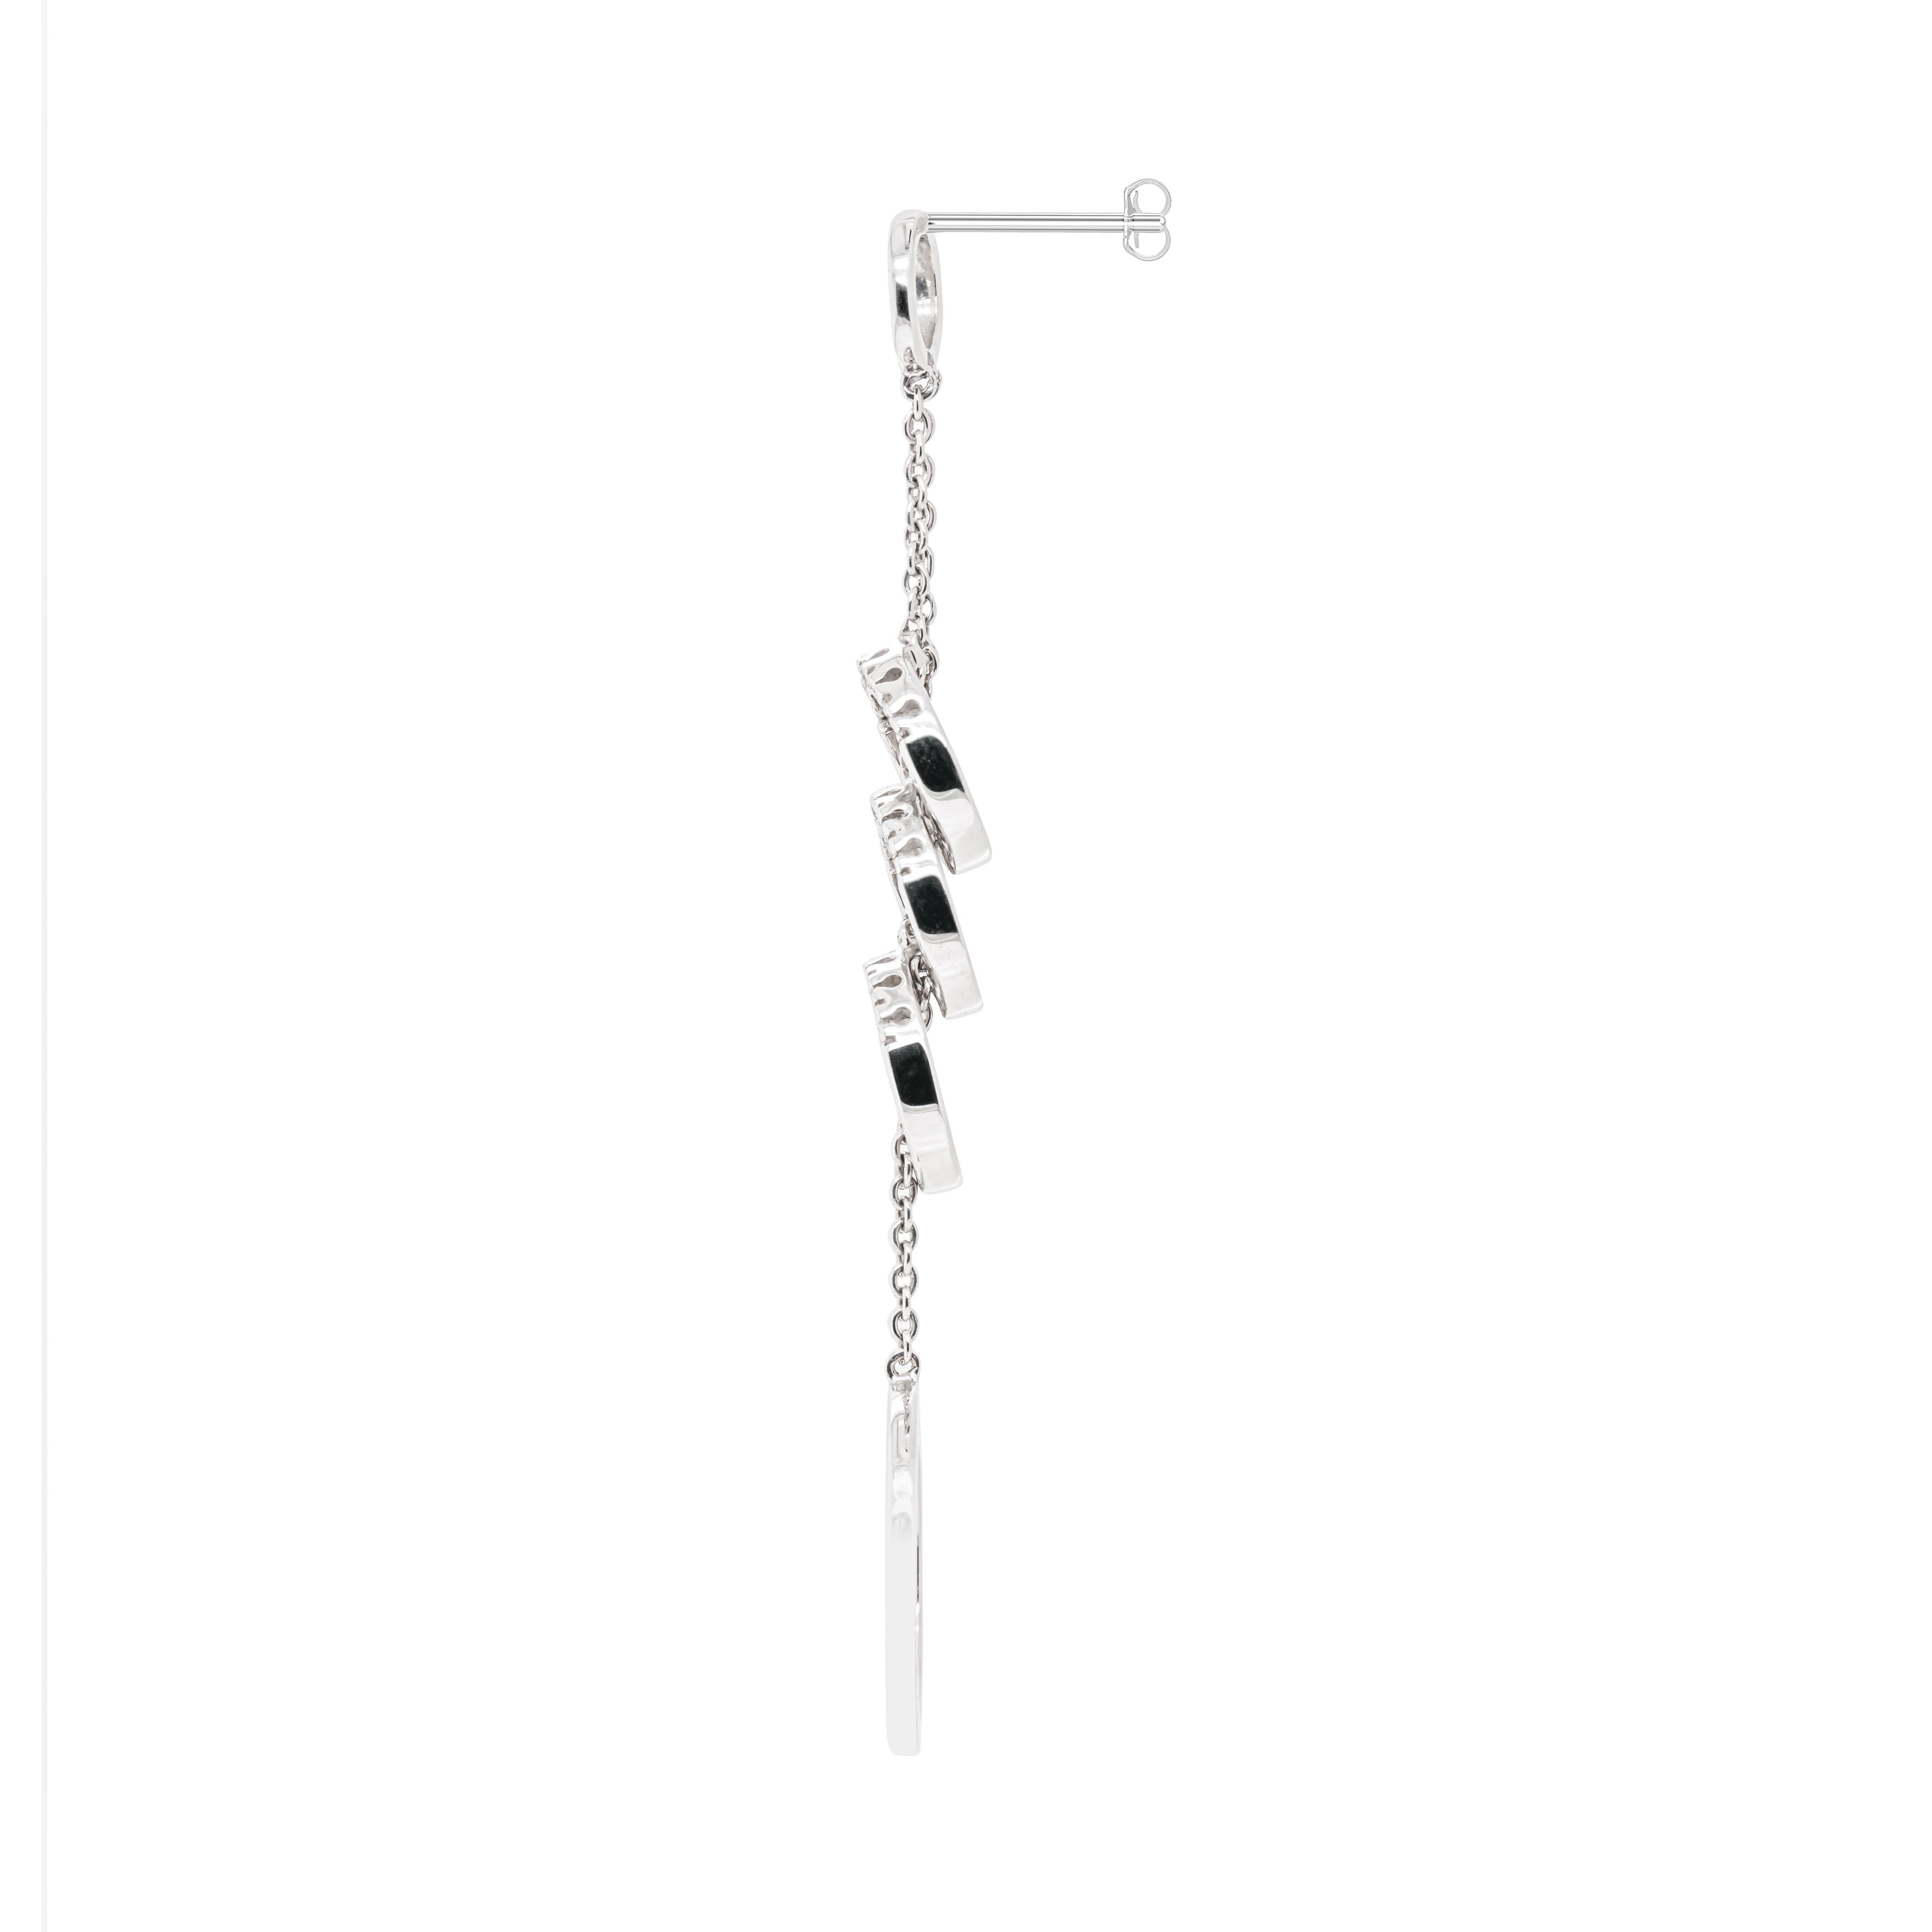 These beautiful 18 carat white gold cascade dangle earrings feature five graduating circles connected by two delicate chains. Slender and dainty, the three middle circles drop sparkle with the shine of six round brilliant cut diamonds inlaid into